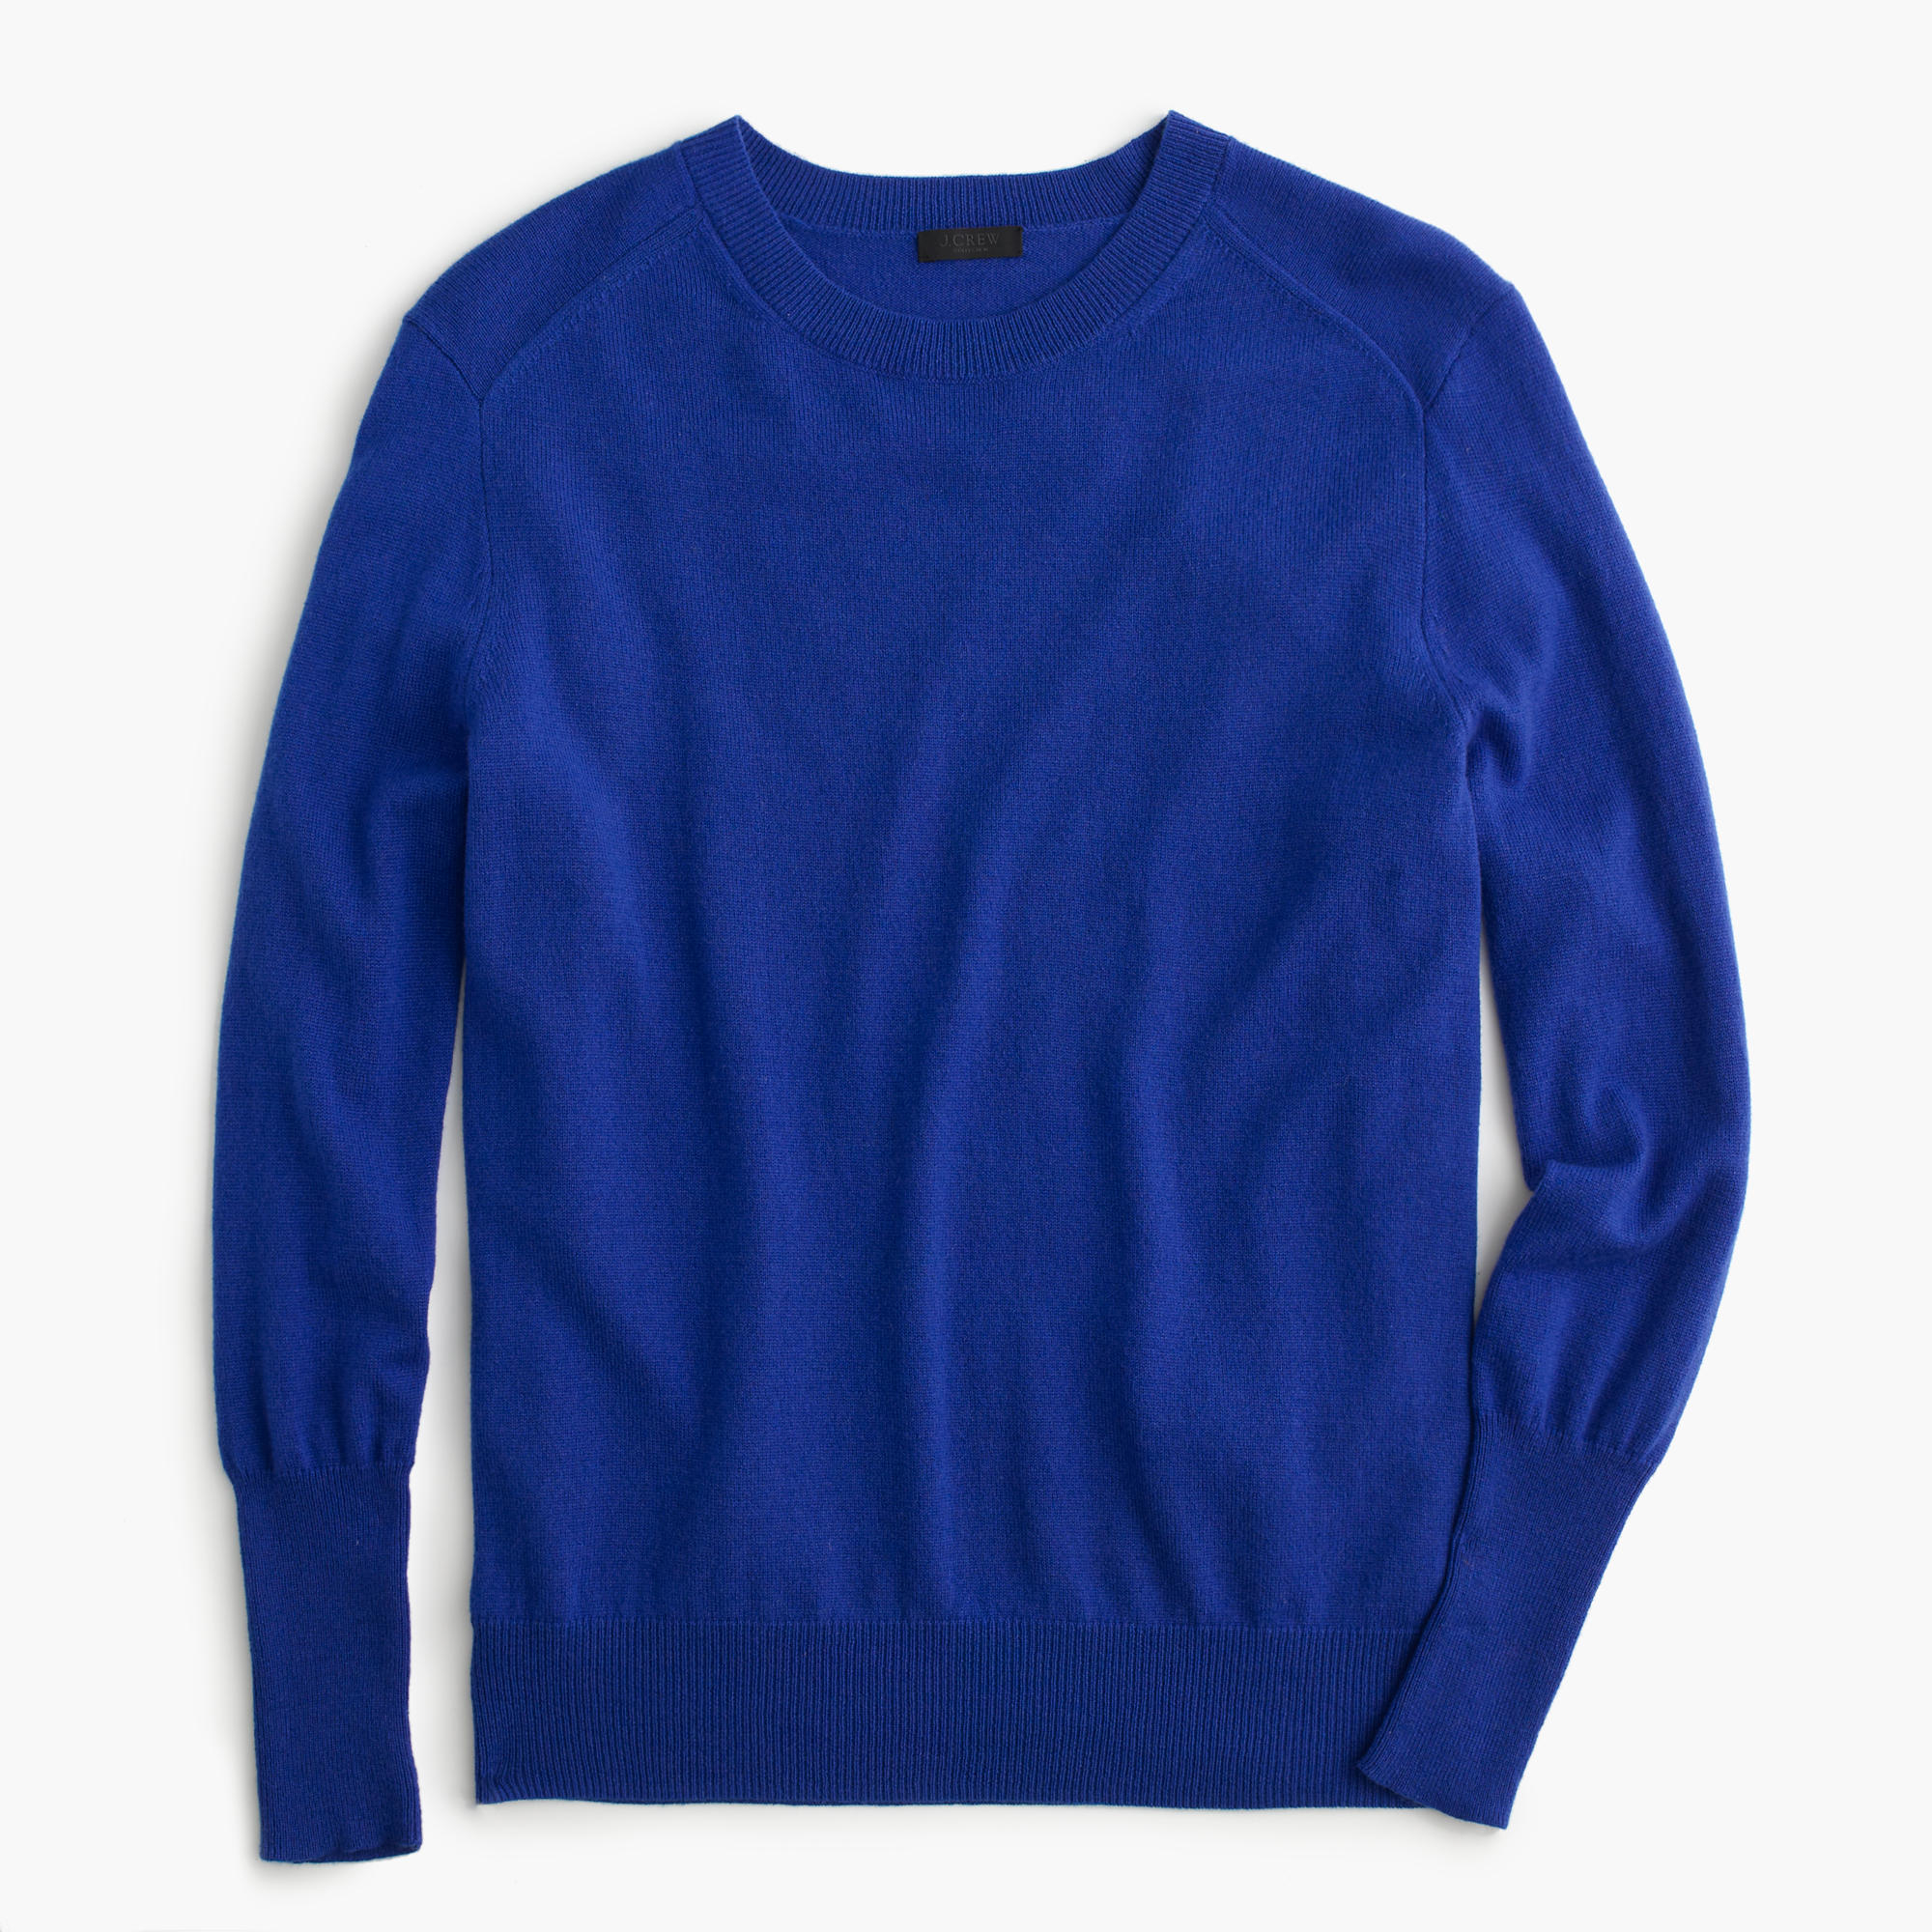 J.crew Italian Relaxed Cashmere Pullover Sweater in Blue (bright ocean ...